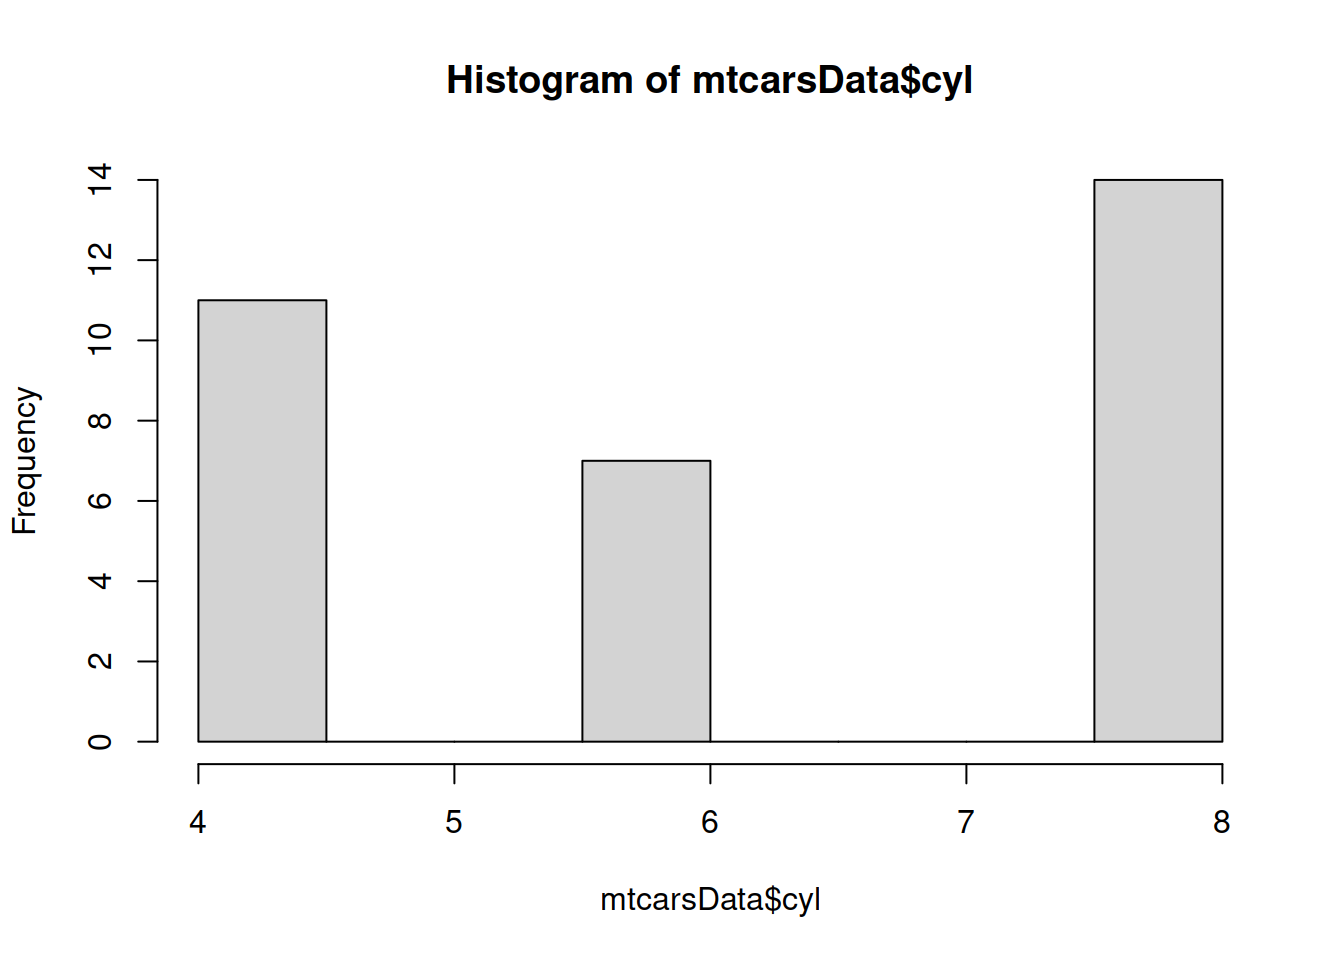 Histogram for the number of cylinders. Do not do this!